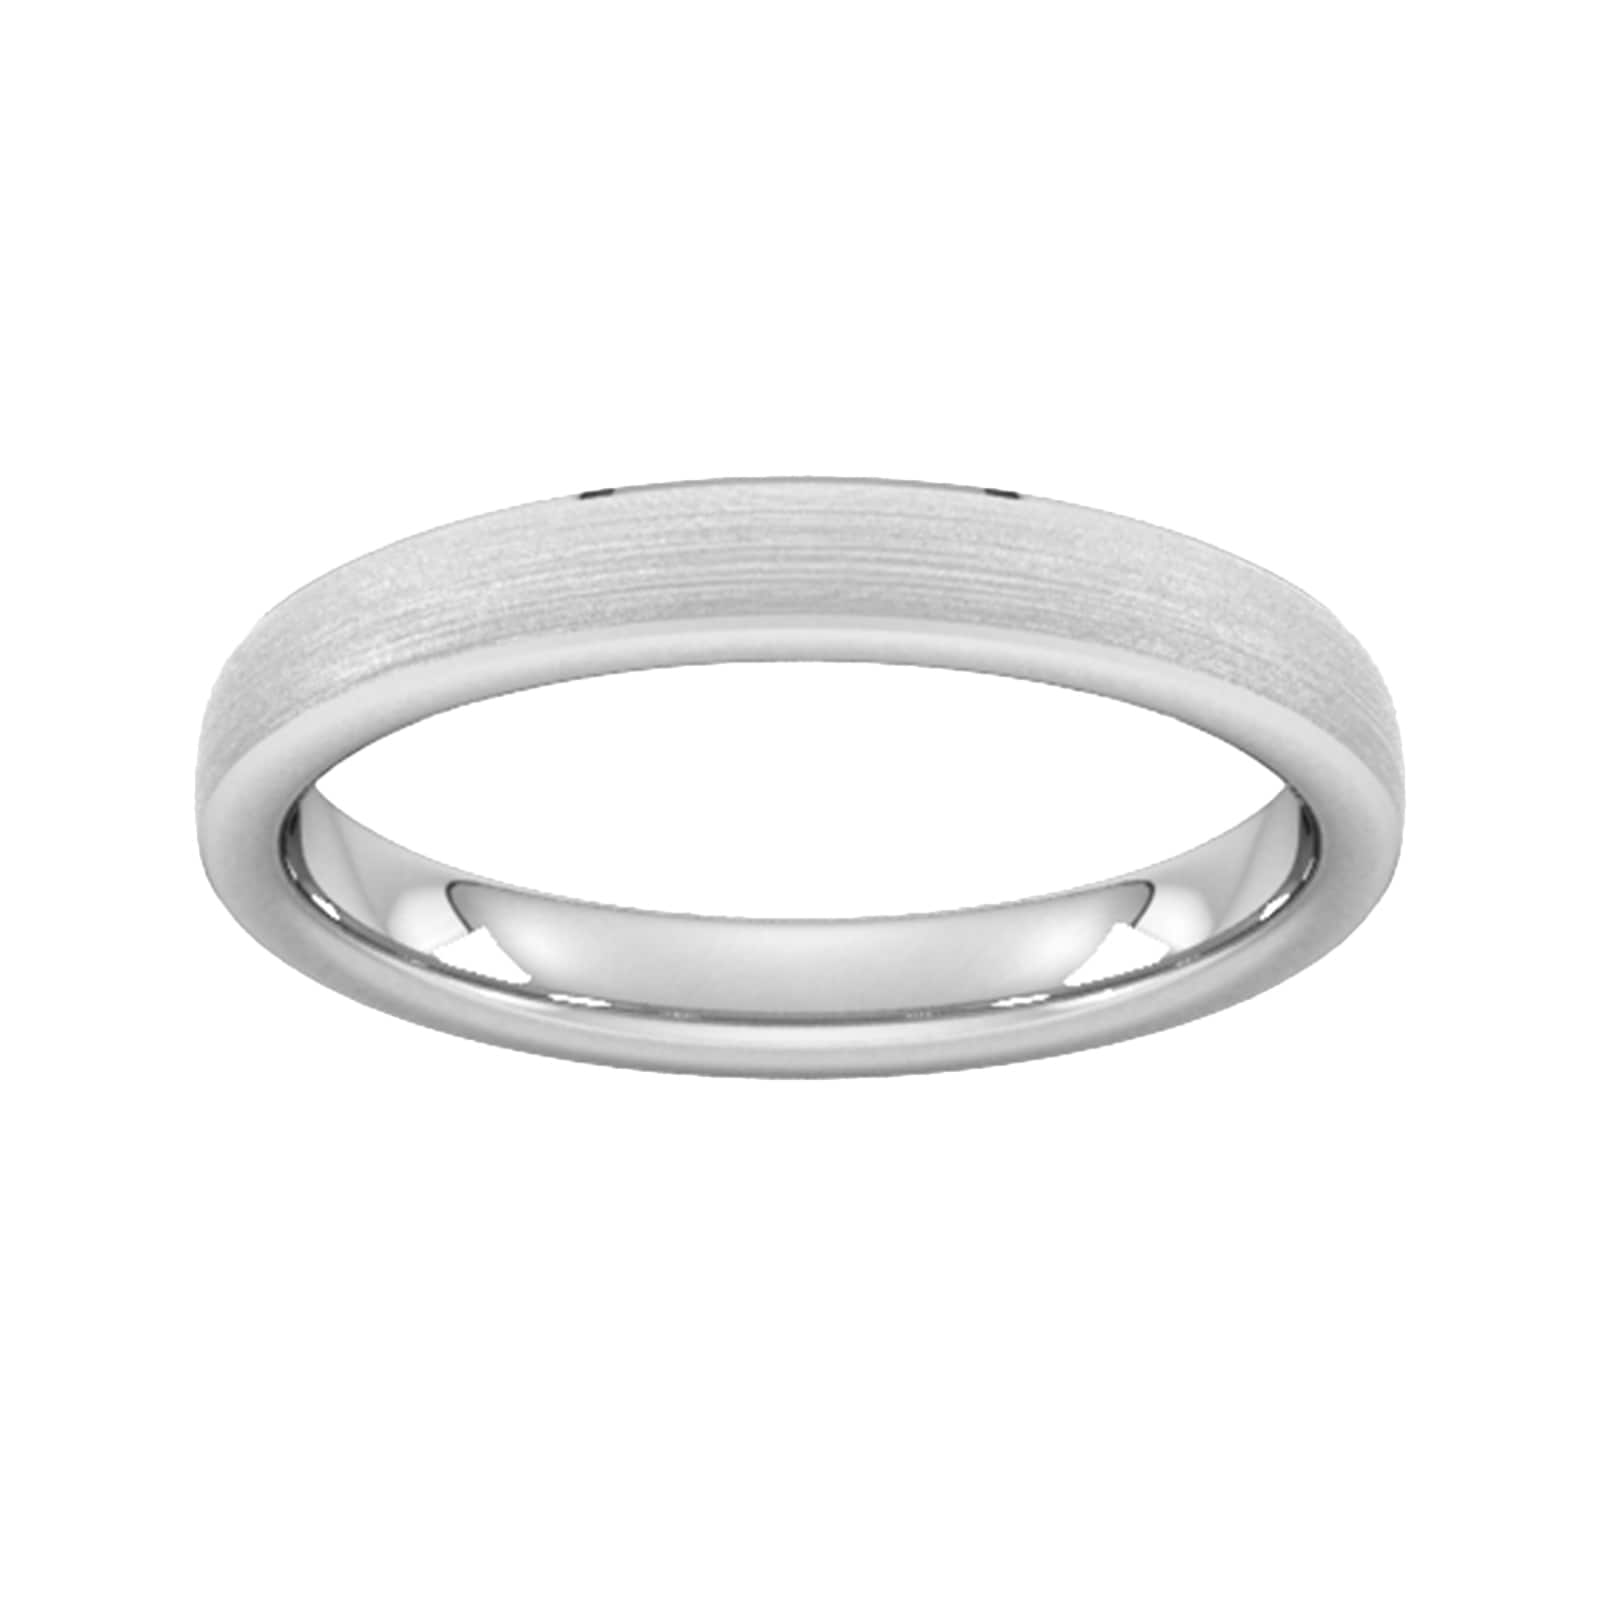 3mm Traditional Court Standard Polished Chamfered Edges With Matt Centre Wedding Ring In 18 Carat White Gold - Ring Size G